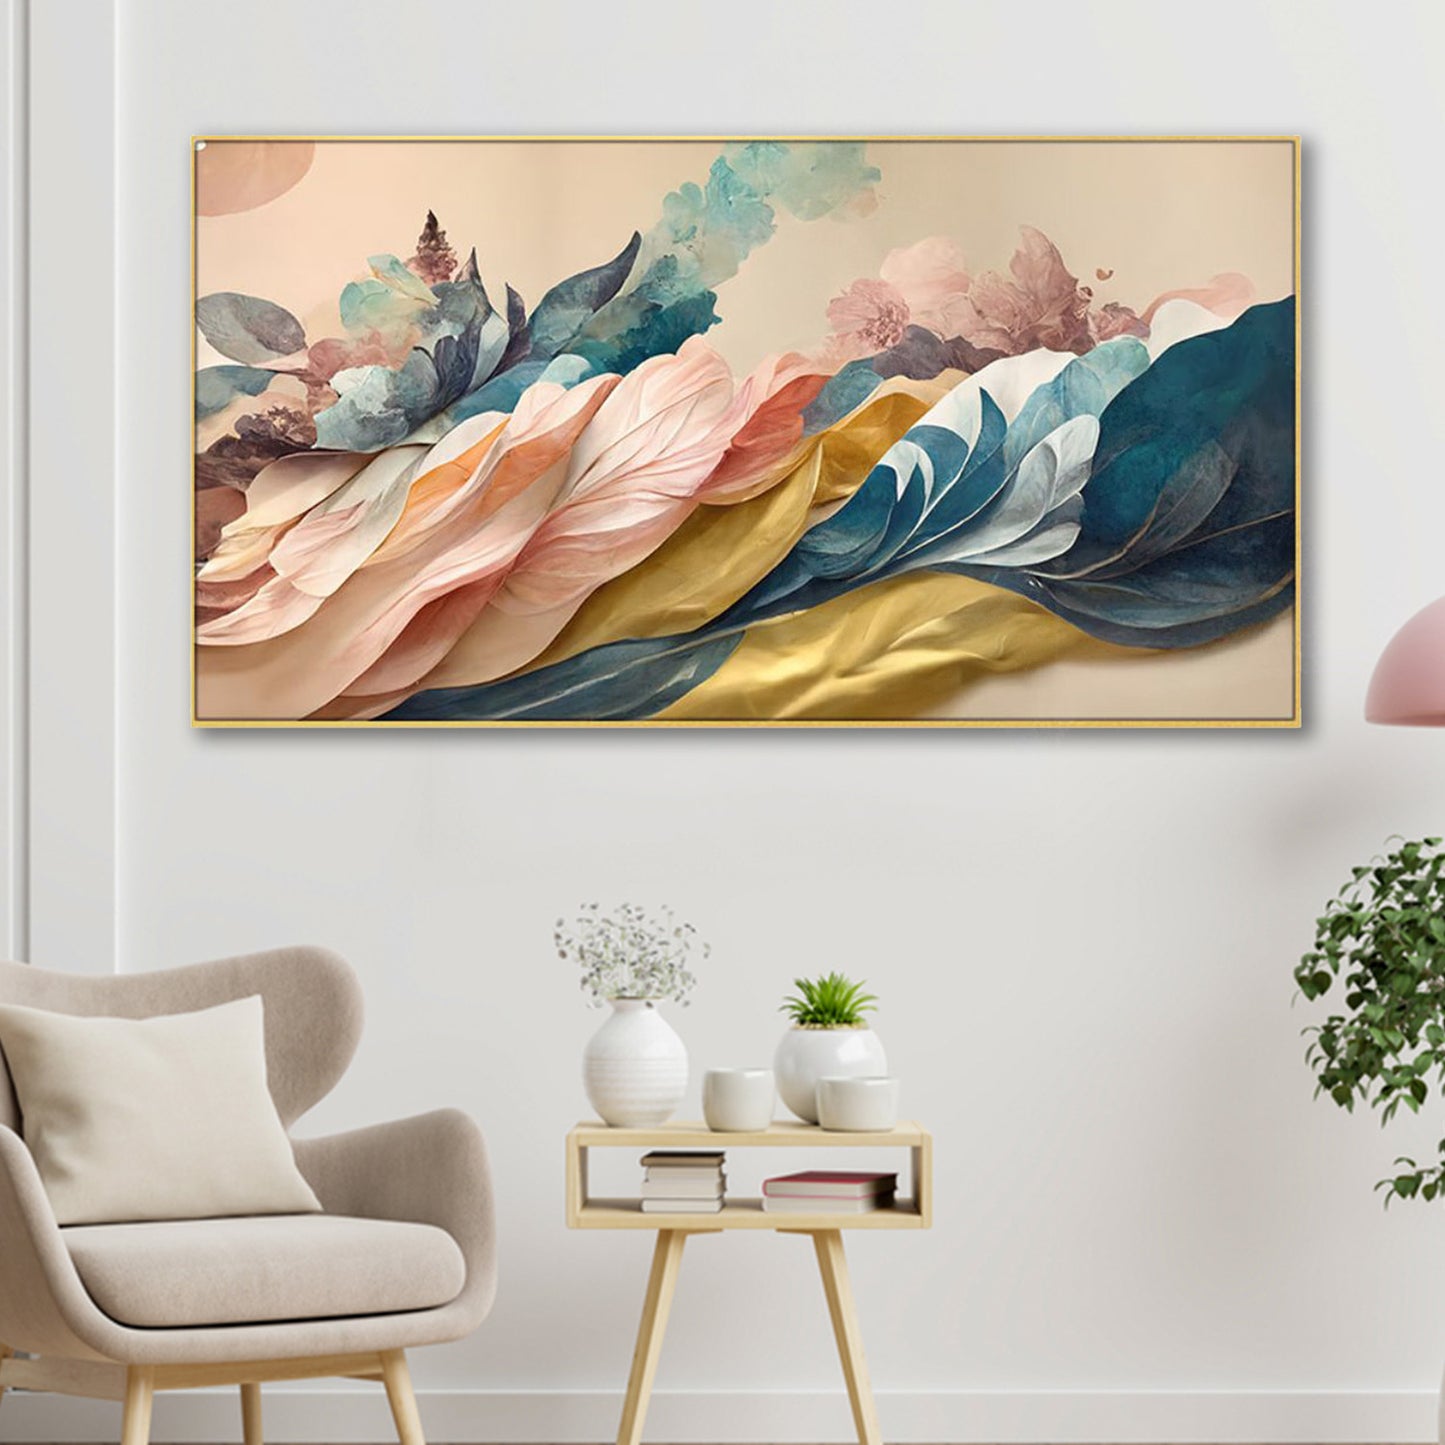 Floral Elegance: Nature's Vivid Beauty Wall Painting